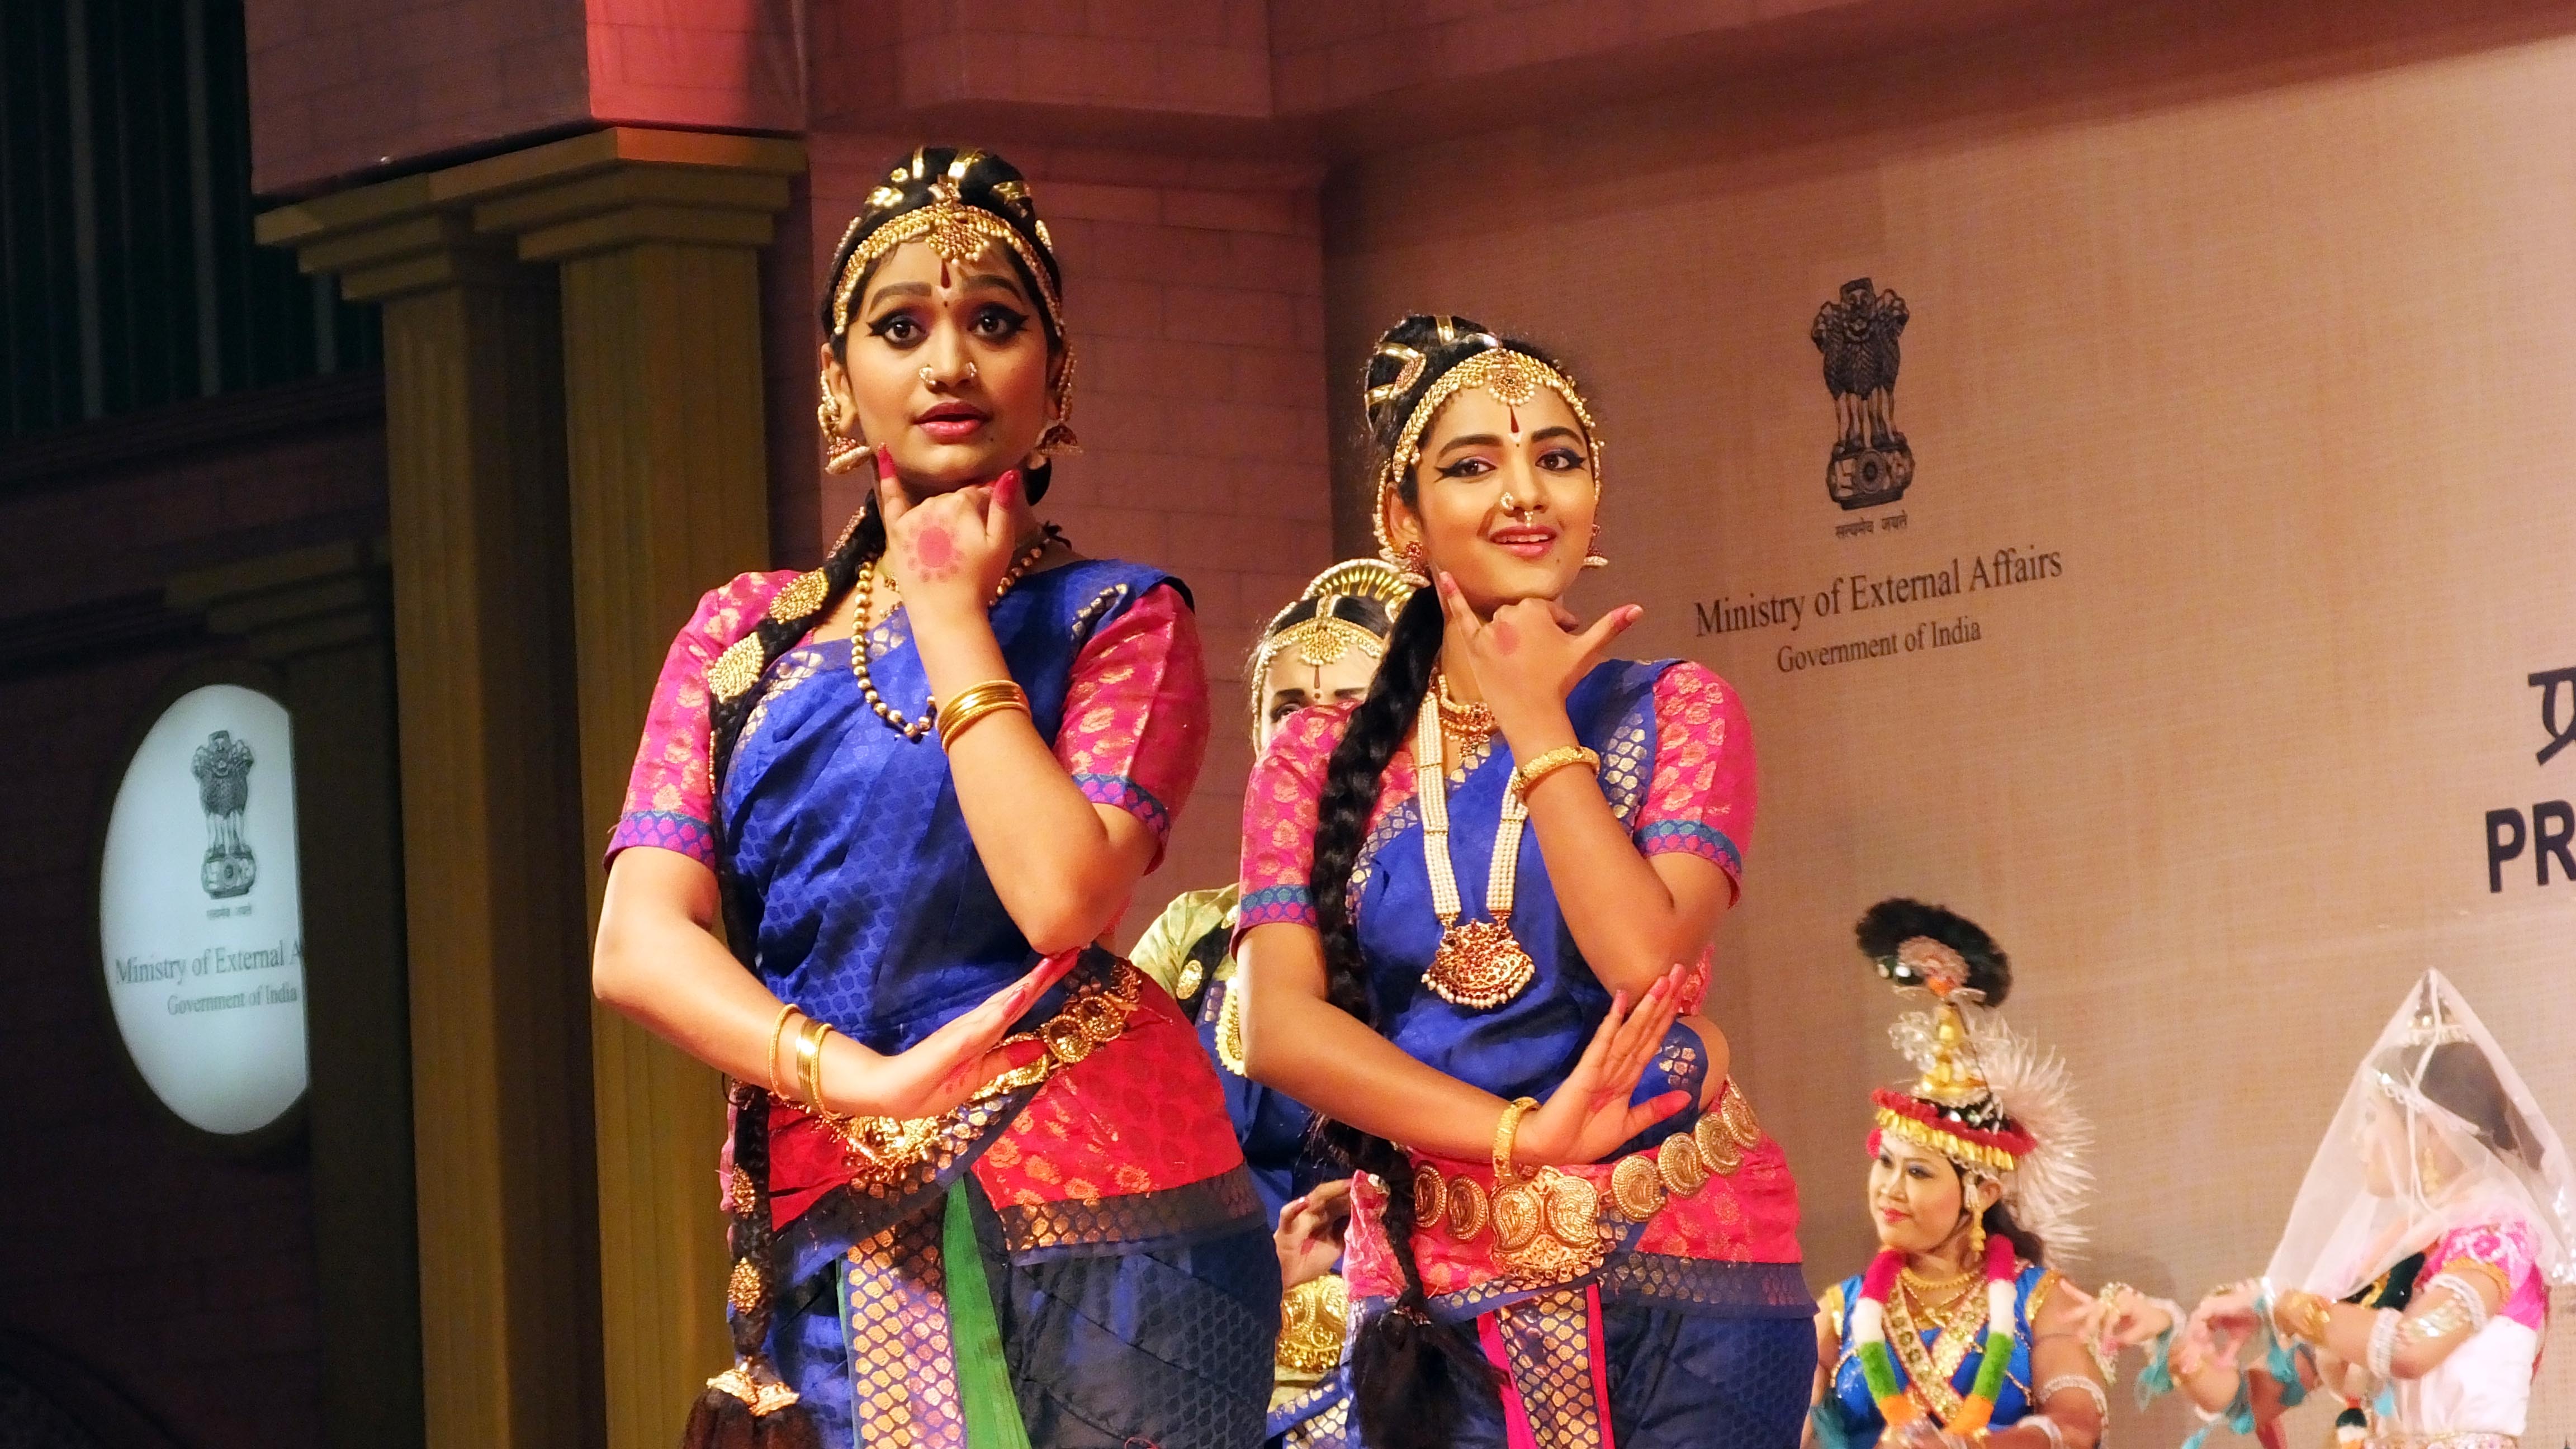 Different Indian dance forms originated in different parts of India and developed according to the local traditions